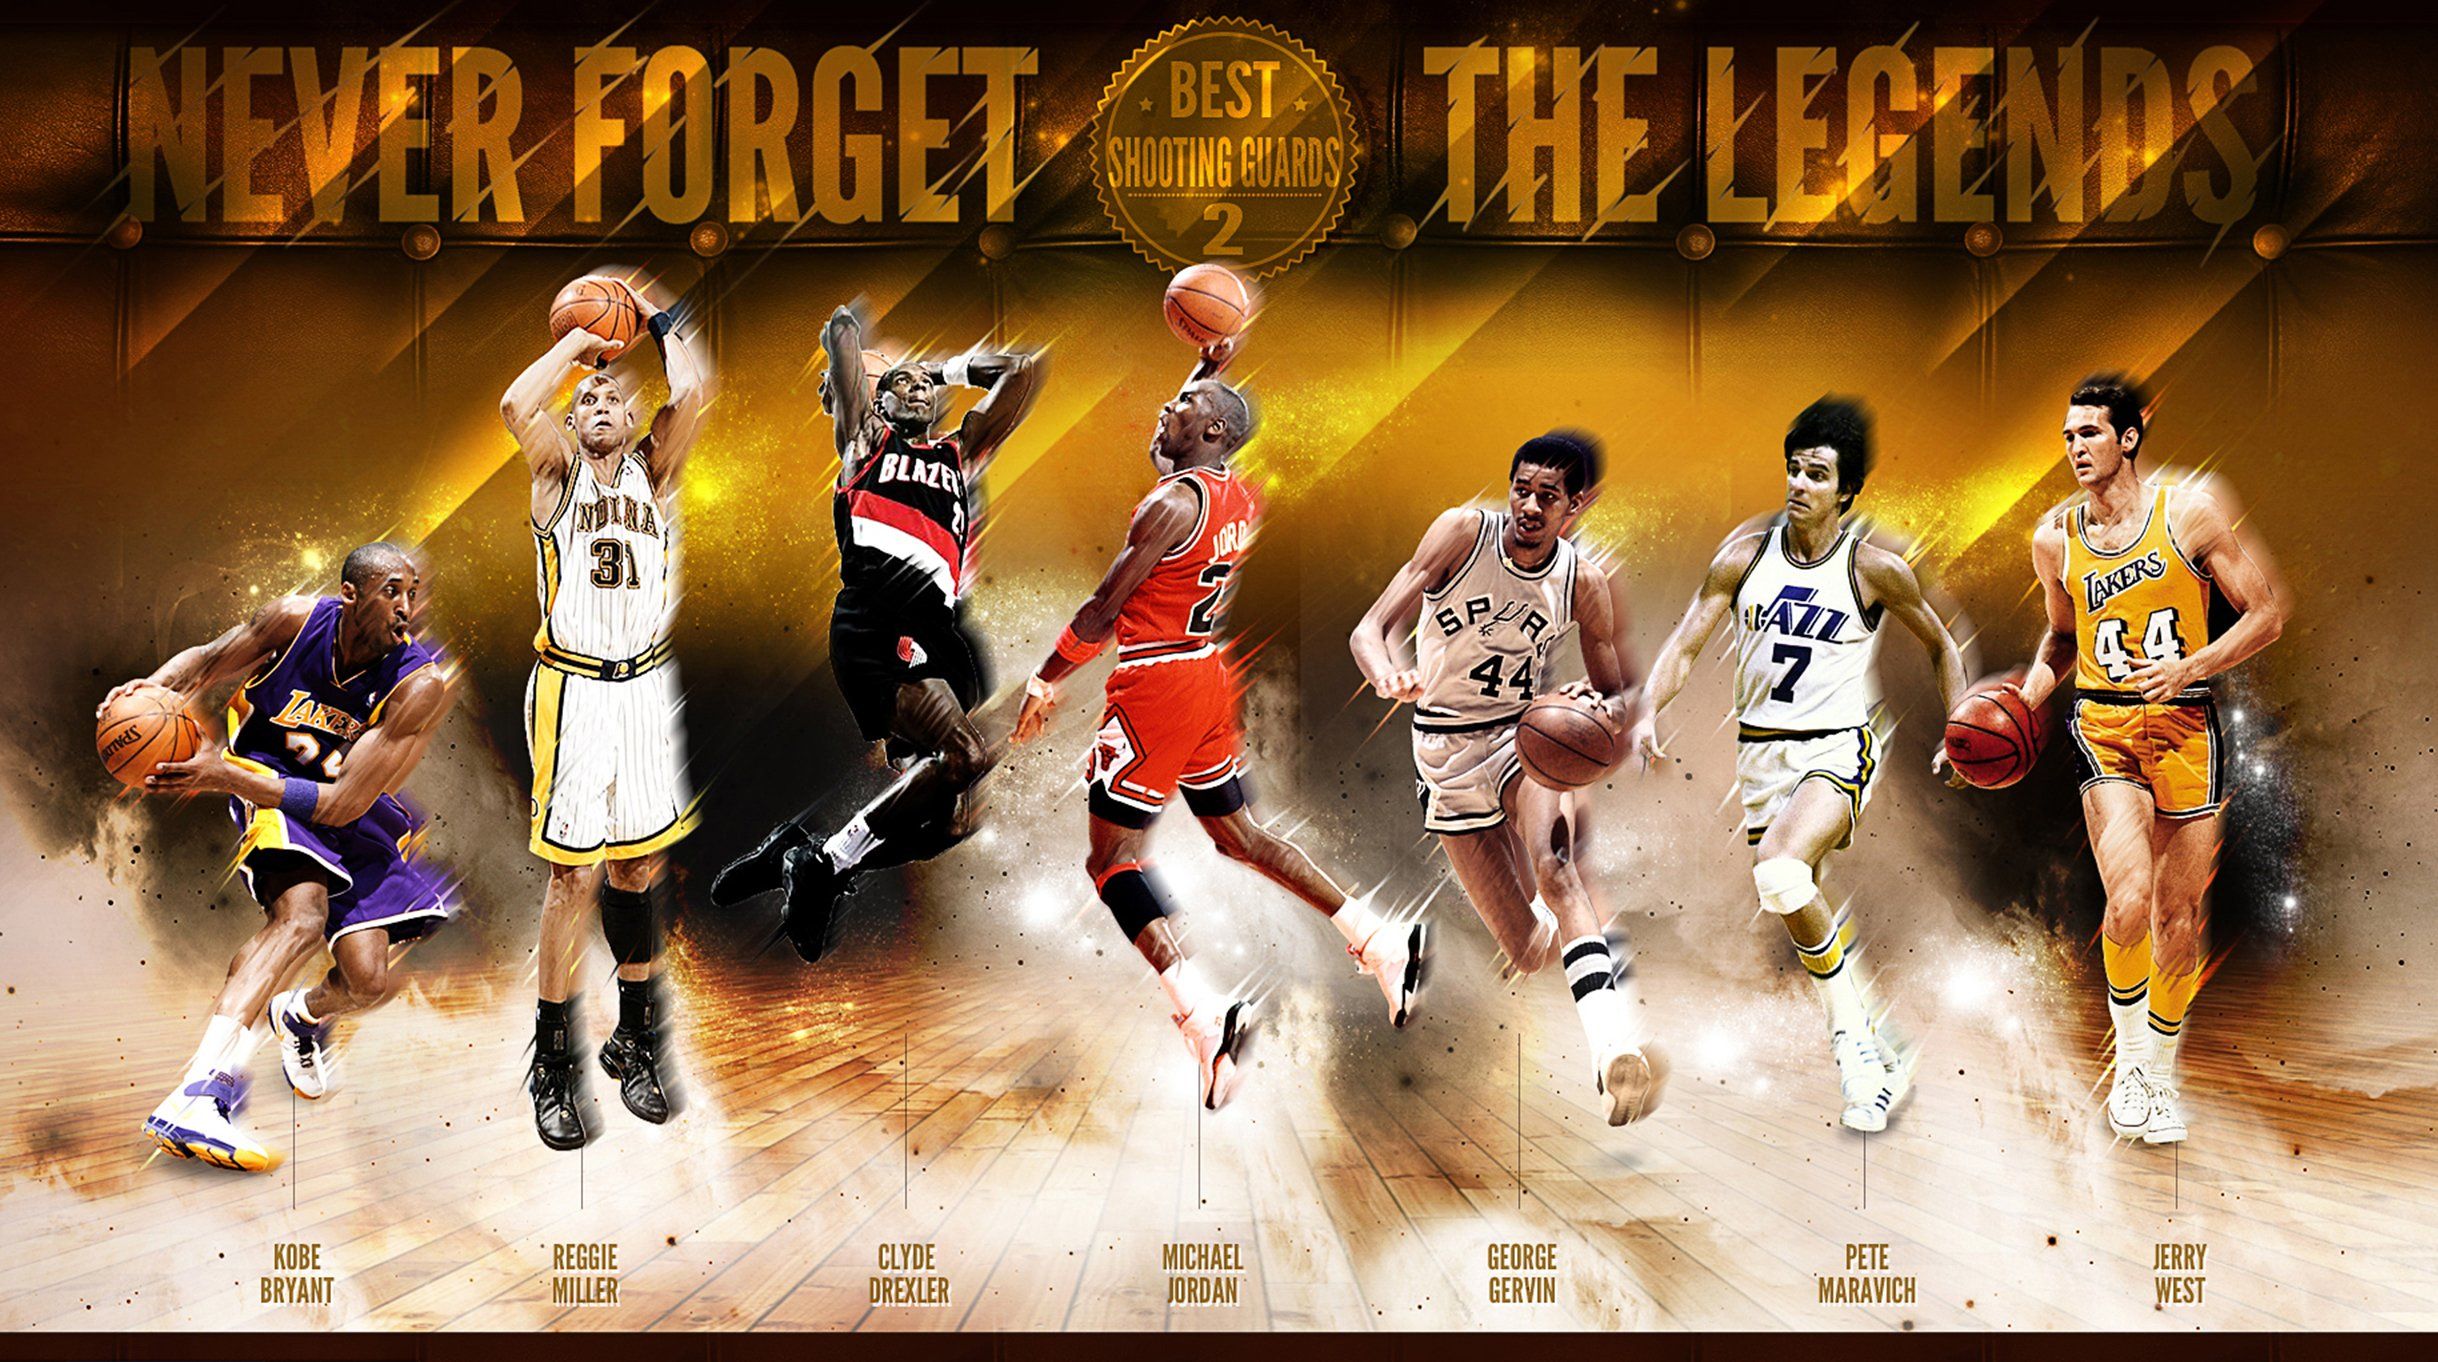 Never forget the legends of basketball. - NBA